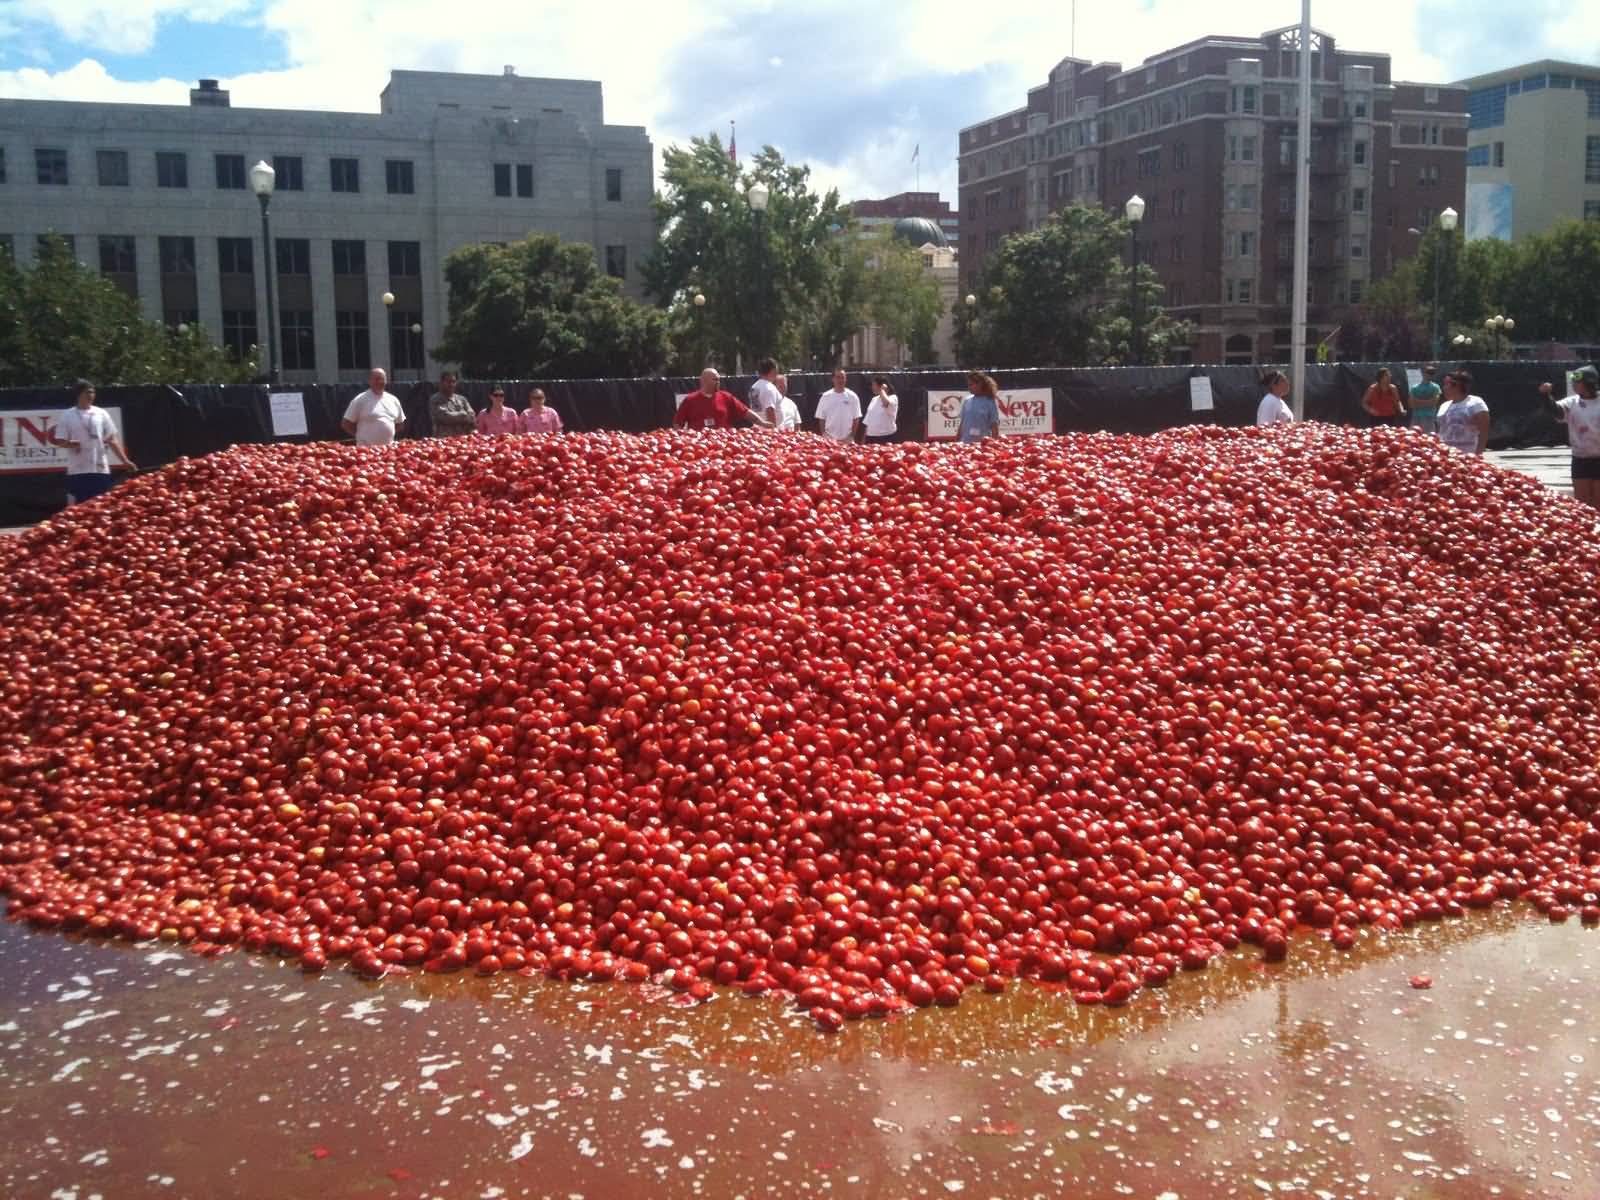 So Many Tomatoes At La Tomatina Food Fight Festival In Bunot, Spain